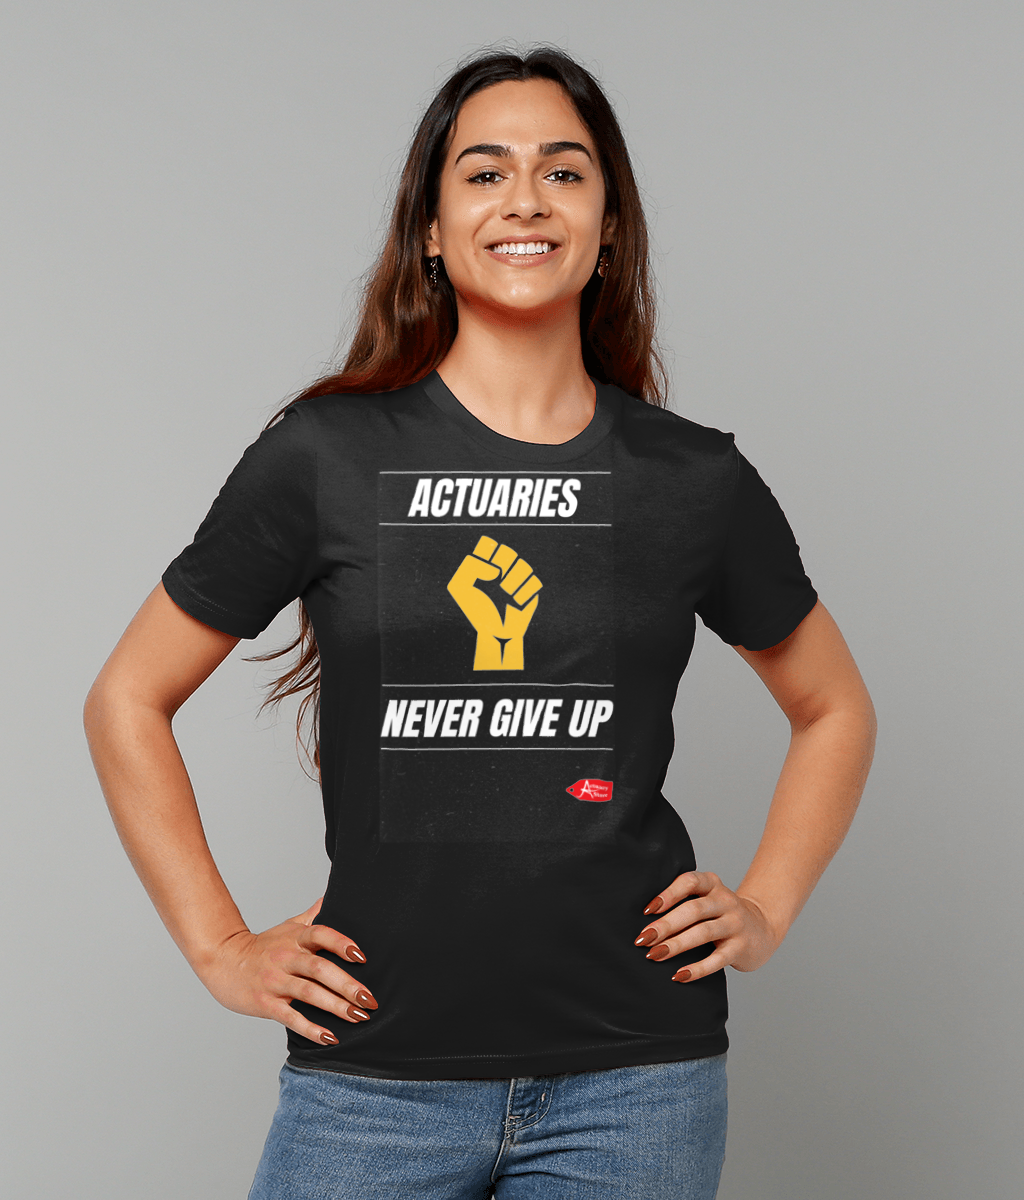 Actuaries Never Give Up T-Shirt